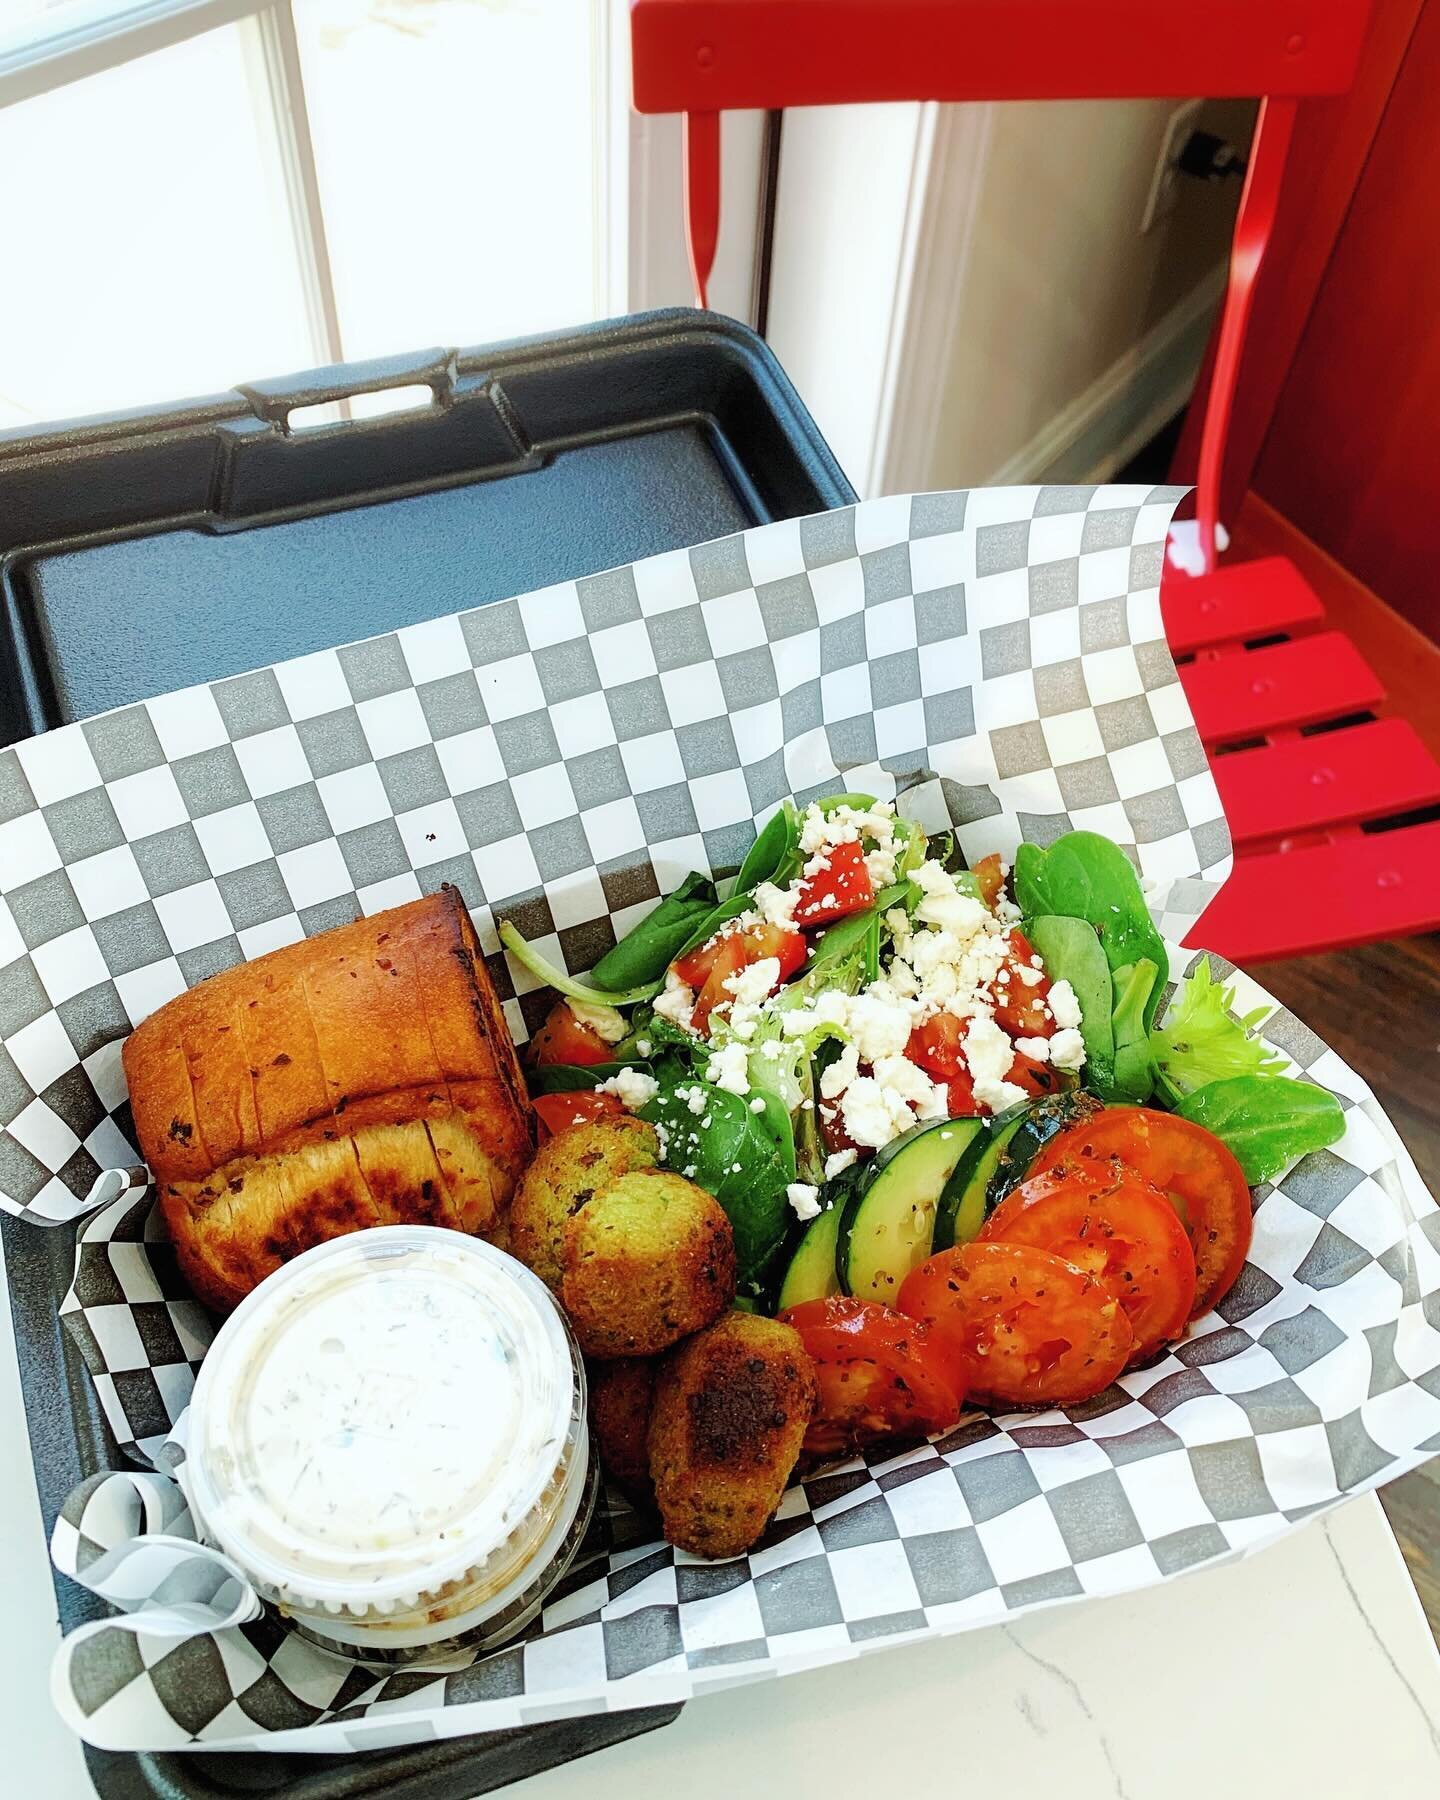 One of the best deals on our menu! 😋 The Veggie Box comes with garlic hummus, felafel, a spring mix salad, horseradish pickles, cucumber, tomato, tzatziki, and a toasted baguette.

#taylorms #mississippi #offbeatgeneralstore #pleinairtaylor #oxfordm